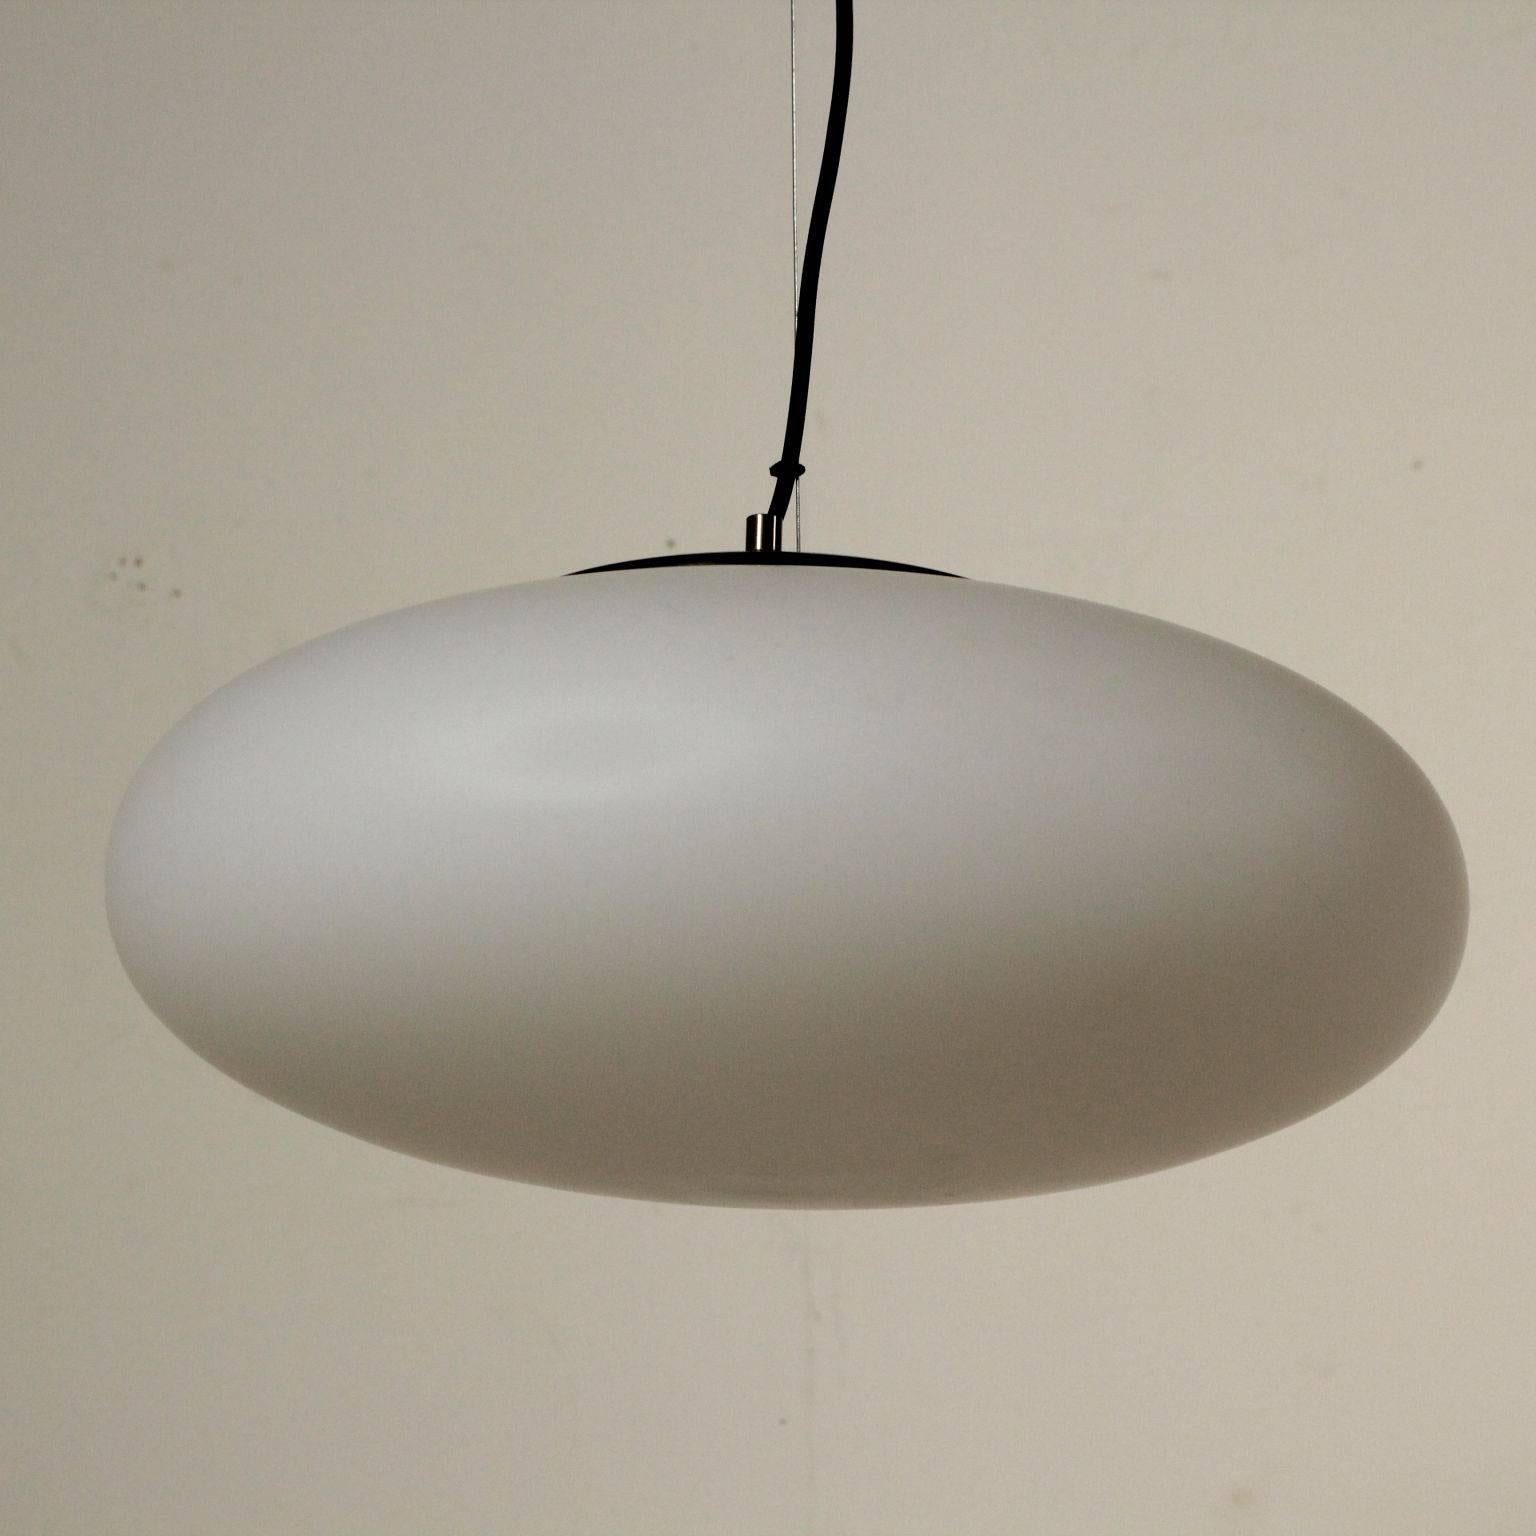 A ceiling lamp, opaline glass and metal. Manufactured in Italy, 1960s.